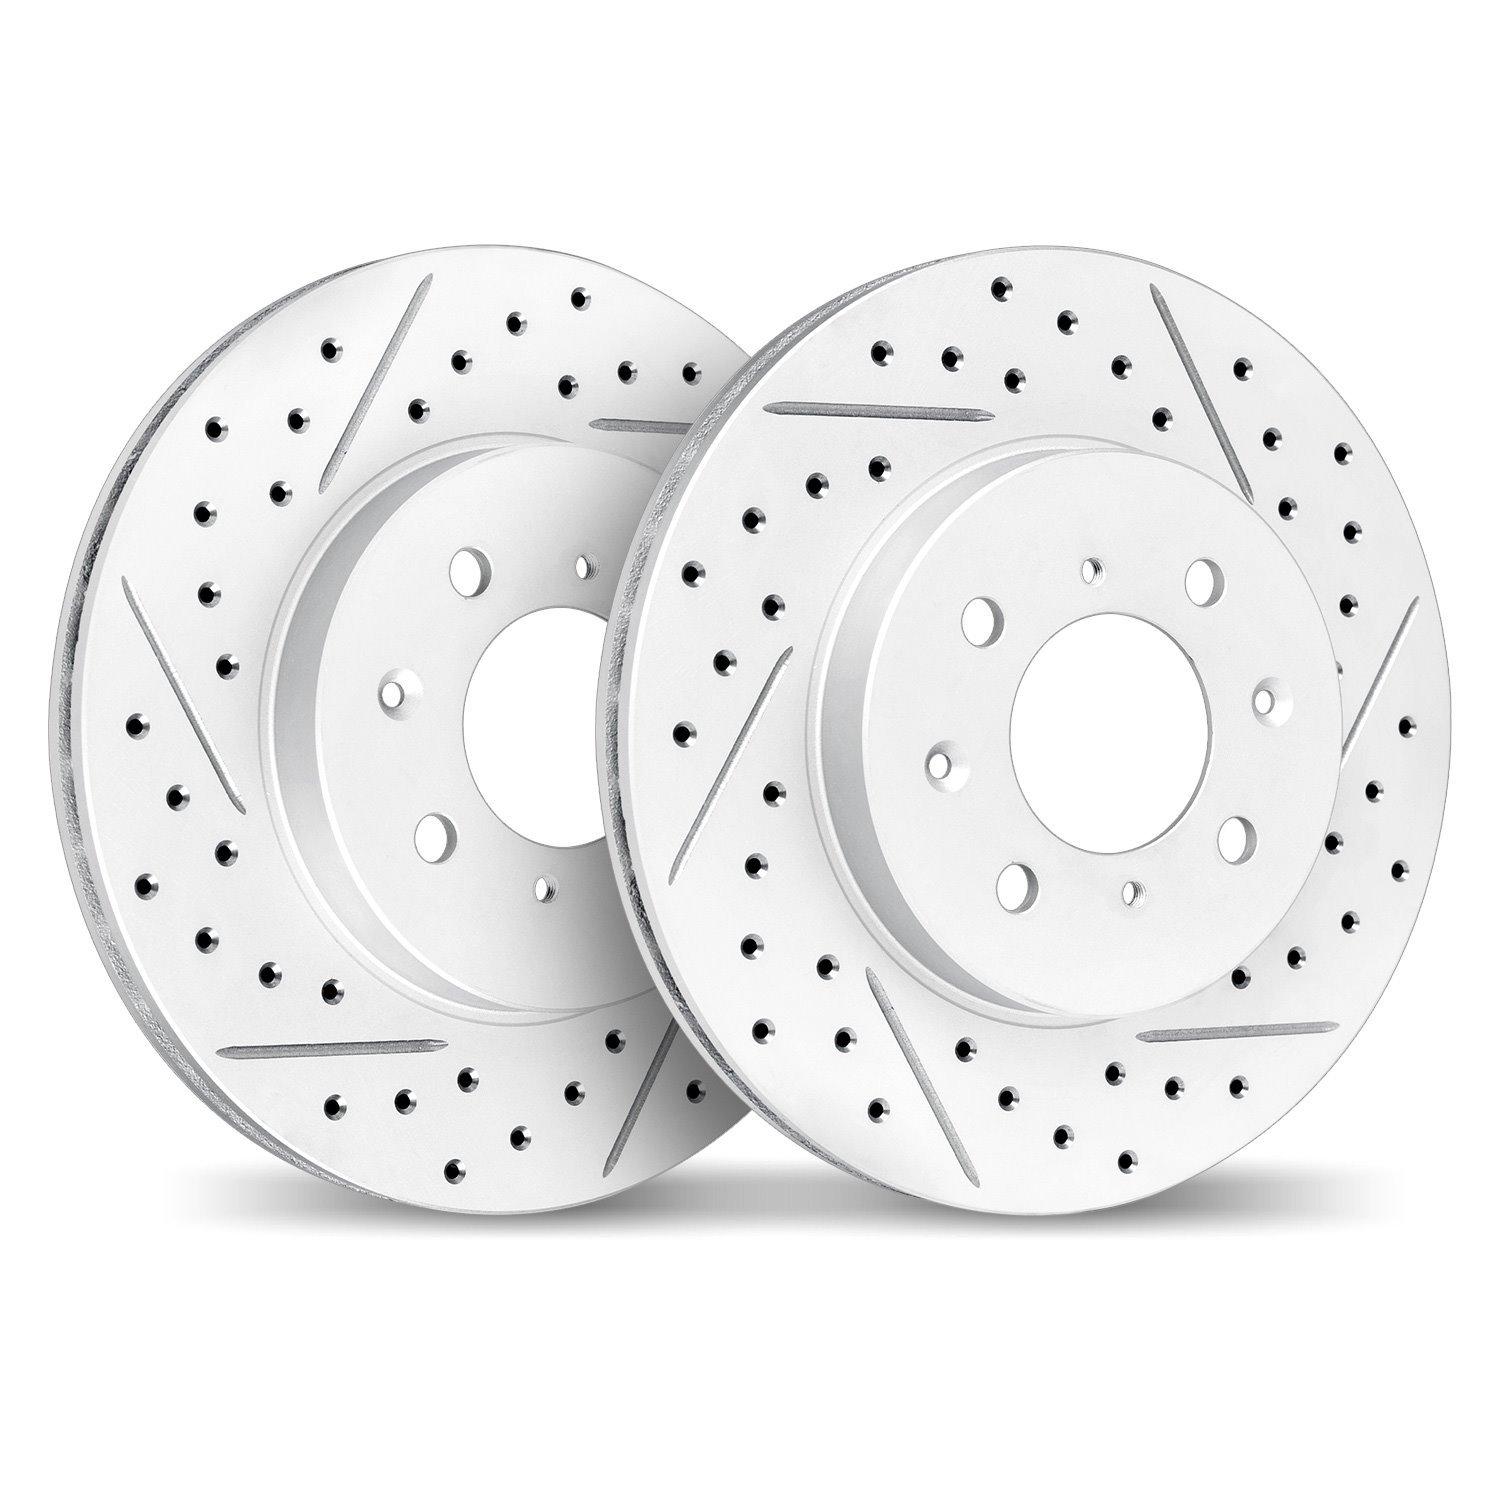 2002-47027 Geoperformance Drilled/Slotted Brake Rotors, Fits Select GM, Position: Front